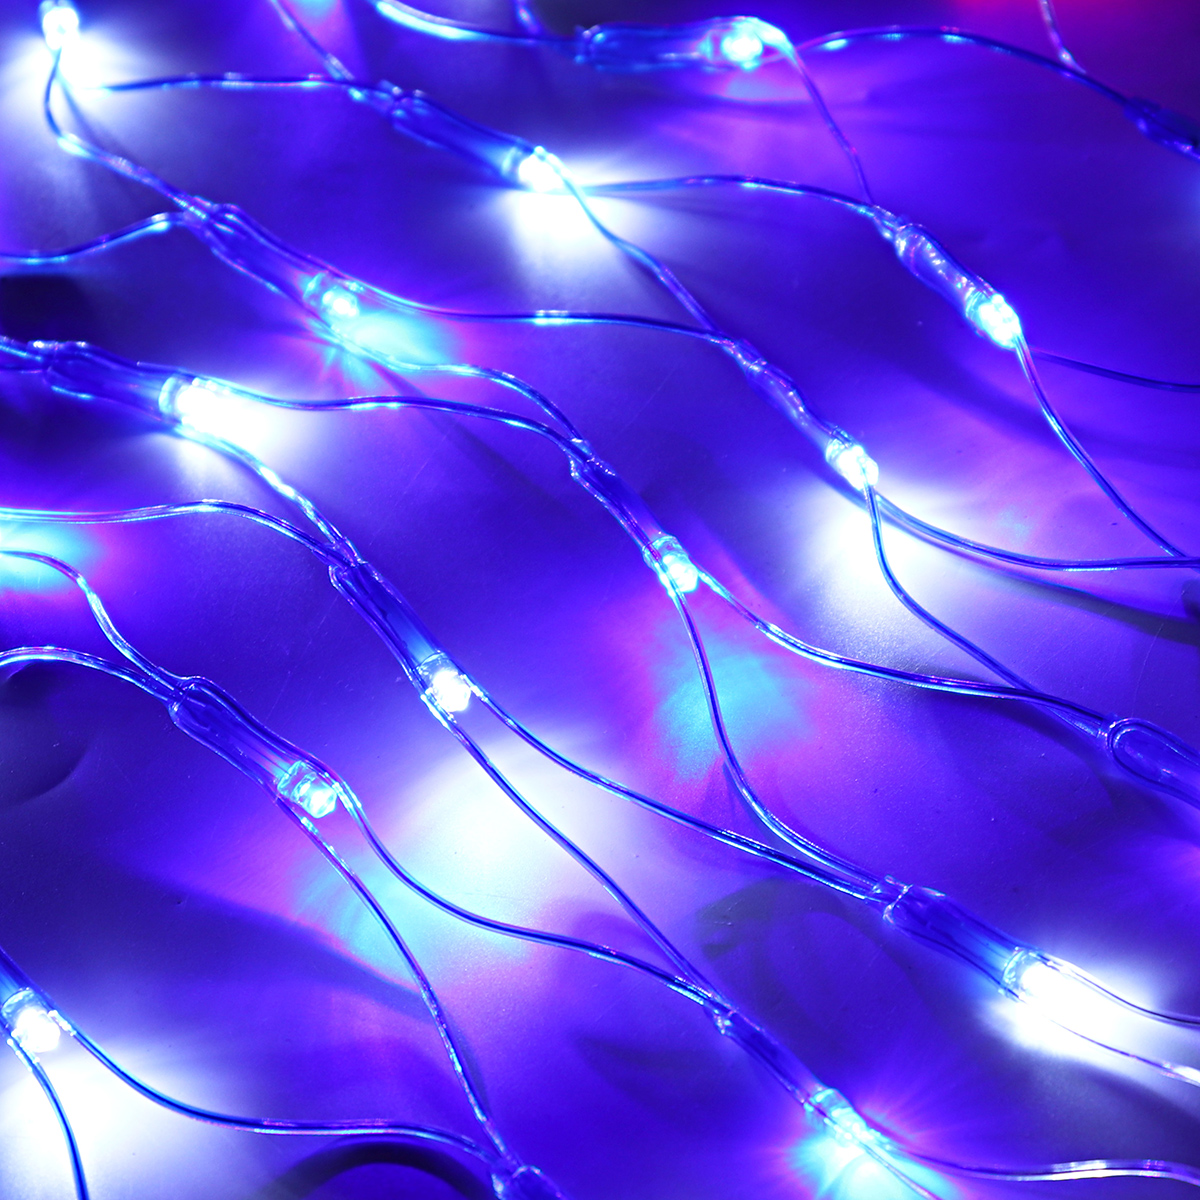 30V-420LEDs-American-Flag-Net-Lamp-Outdoor-Waterproof-String-Light-Yard-Home-Holiday-Decoration-US-P-1732818-8